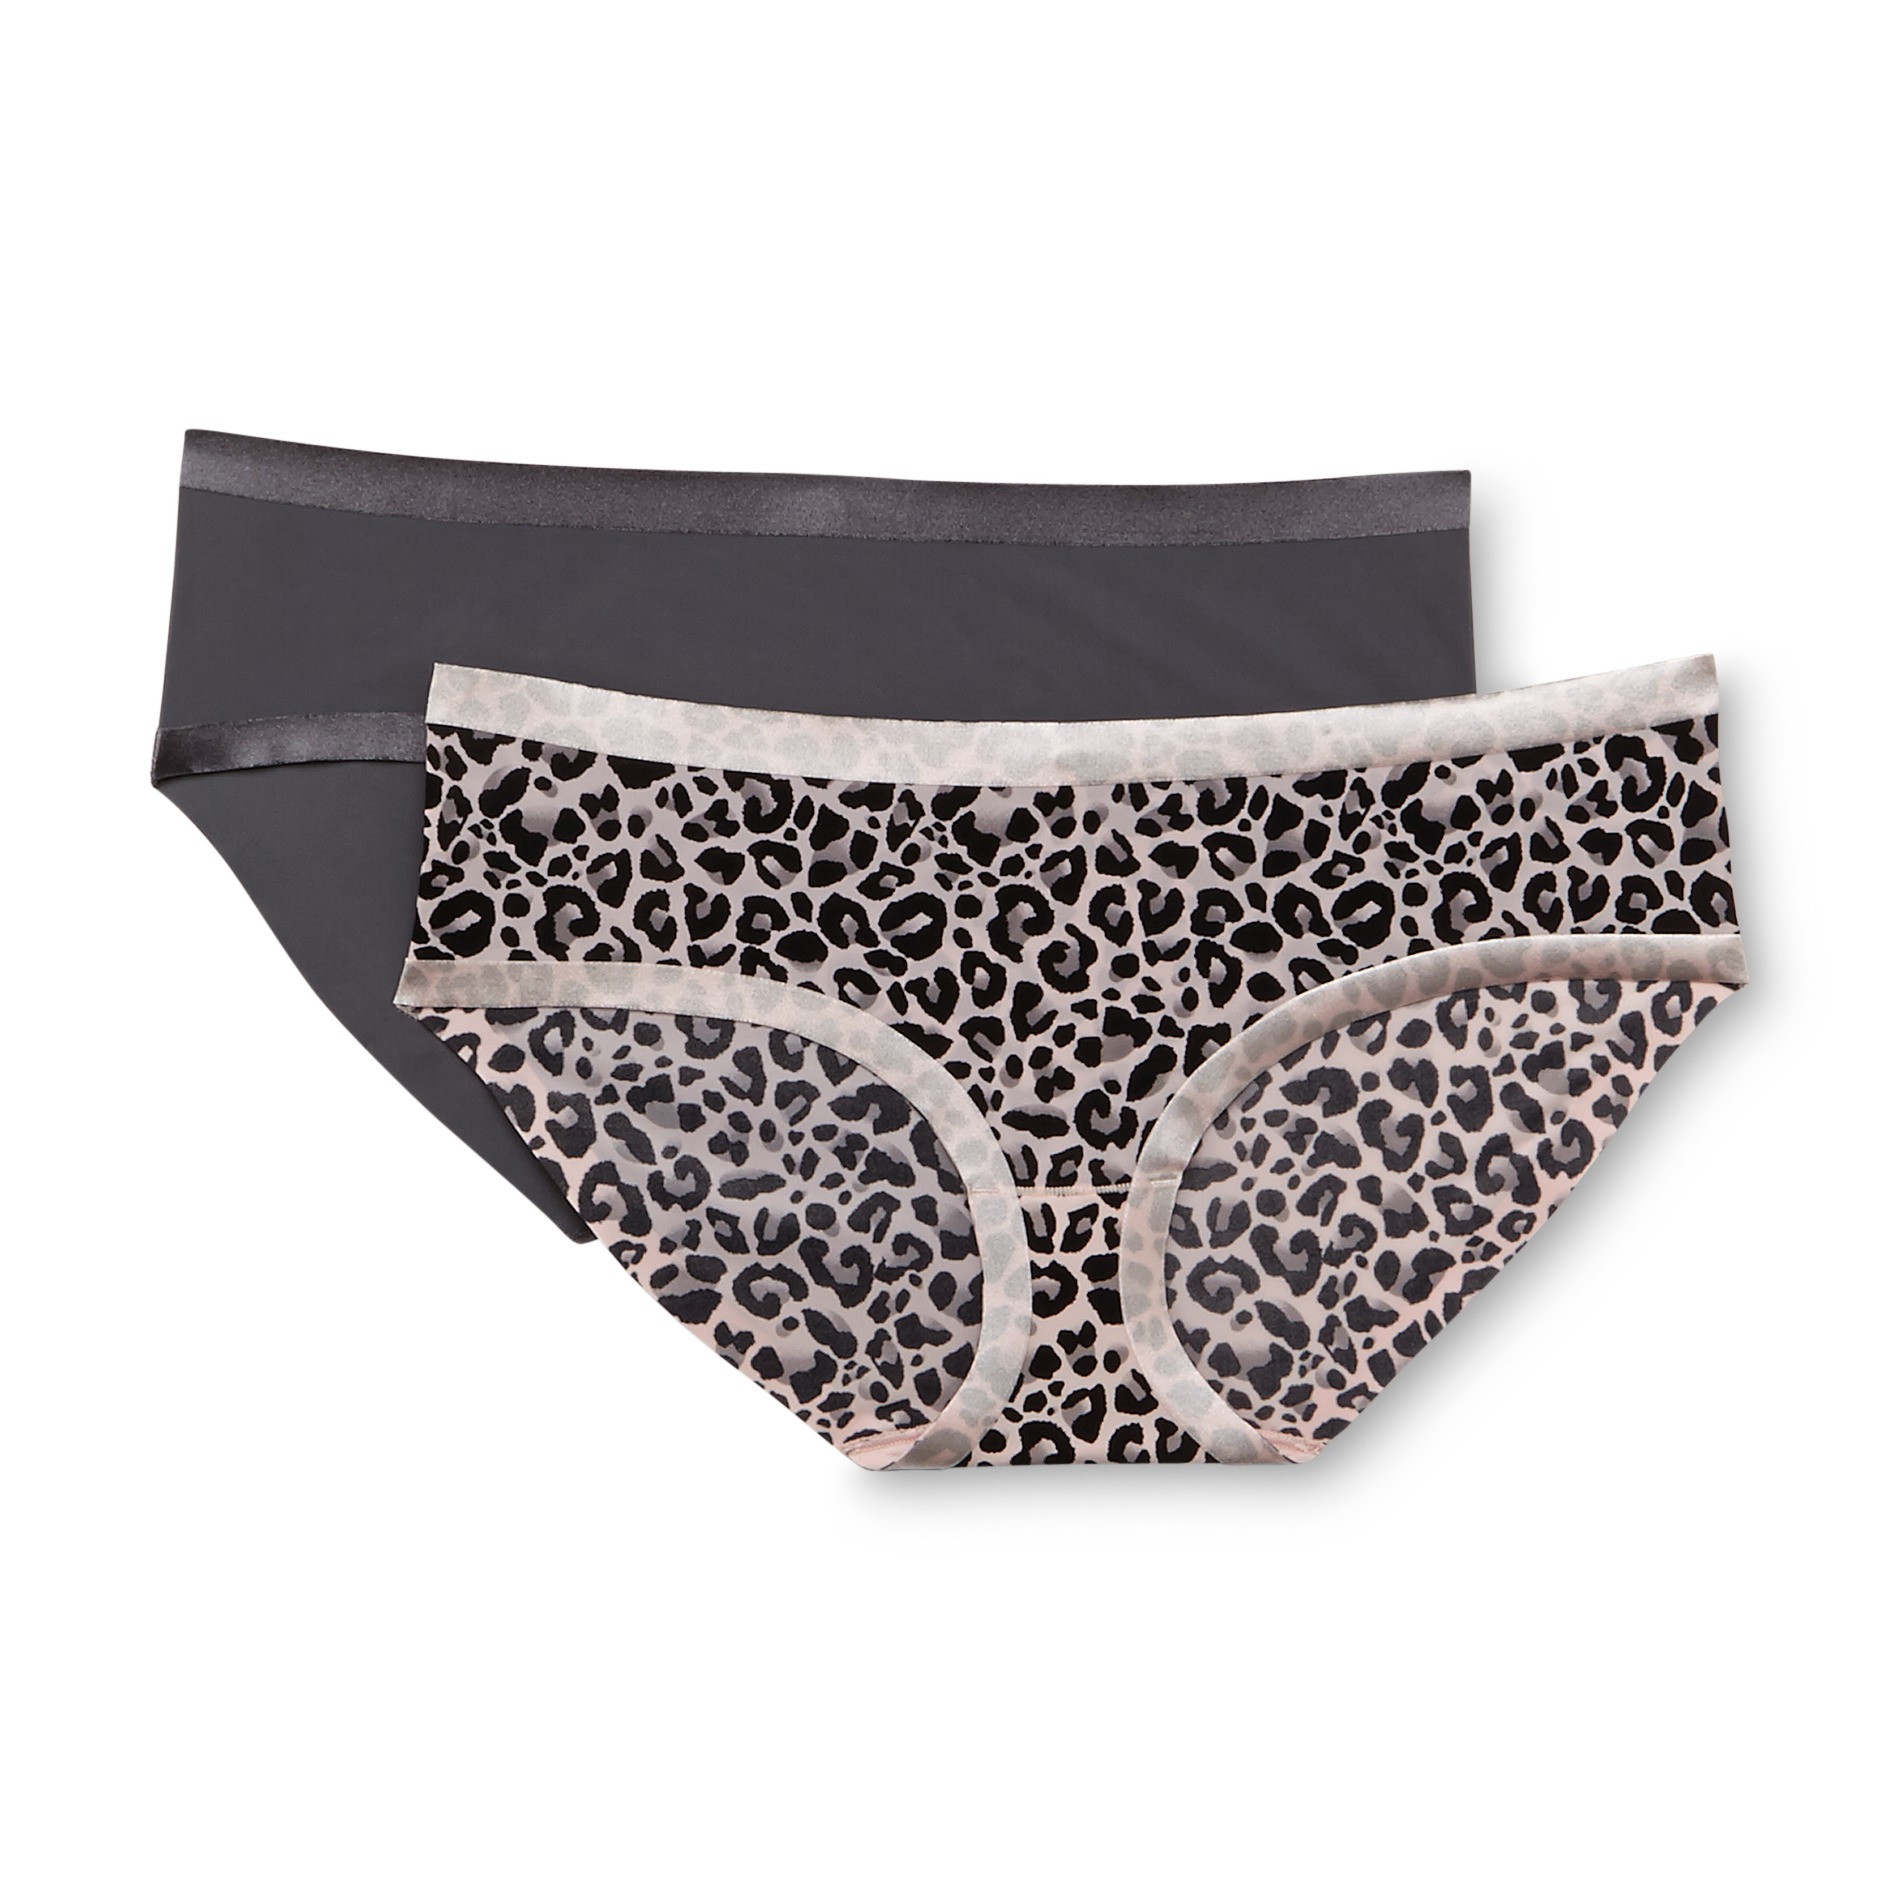 Imagination by Lamour Women's 2-Pack Satin-Trim Hipster Panties - Leopard